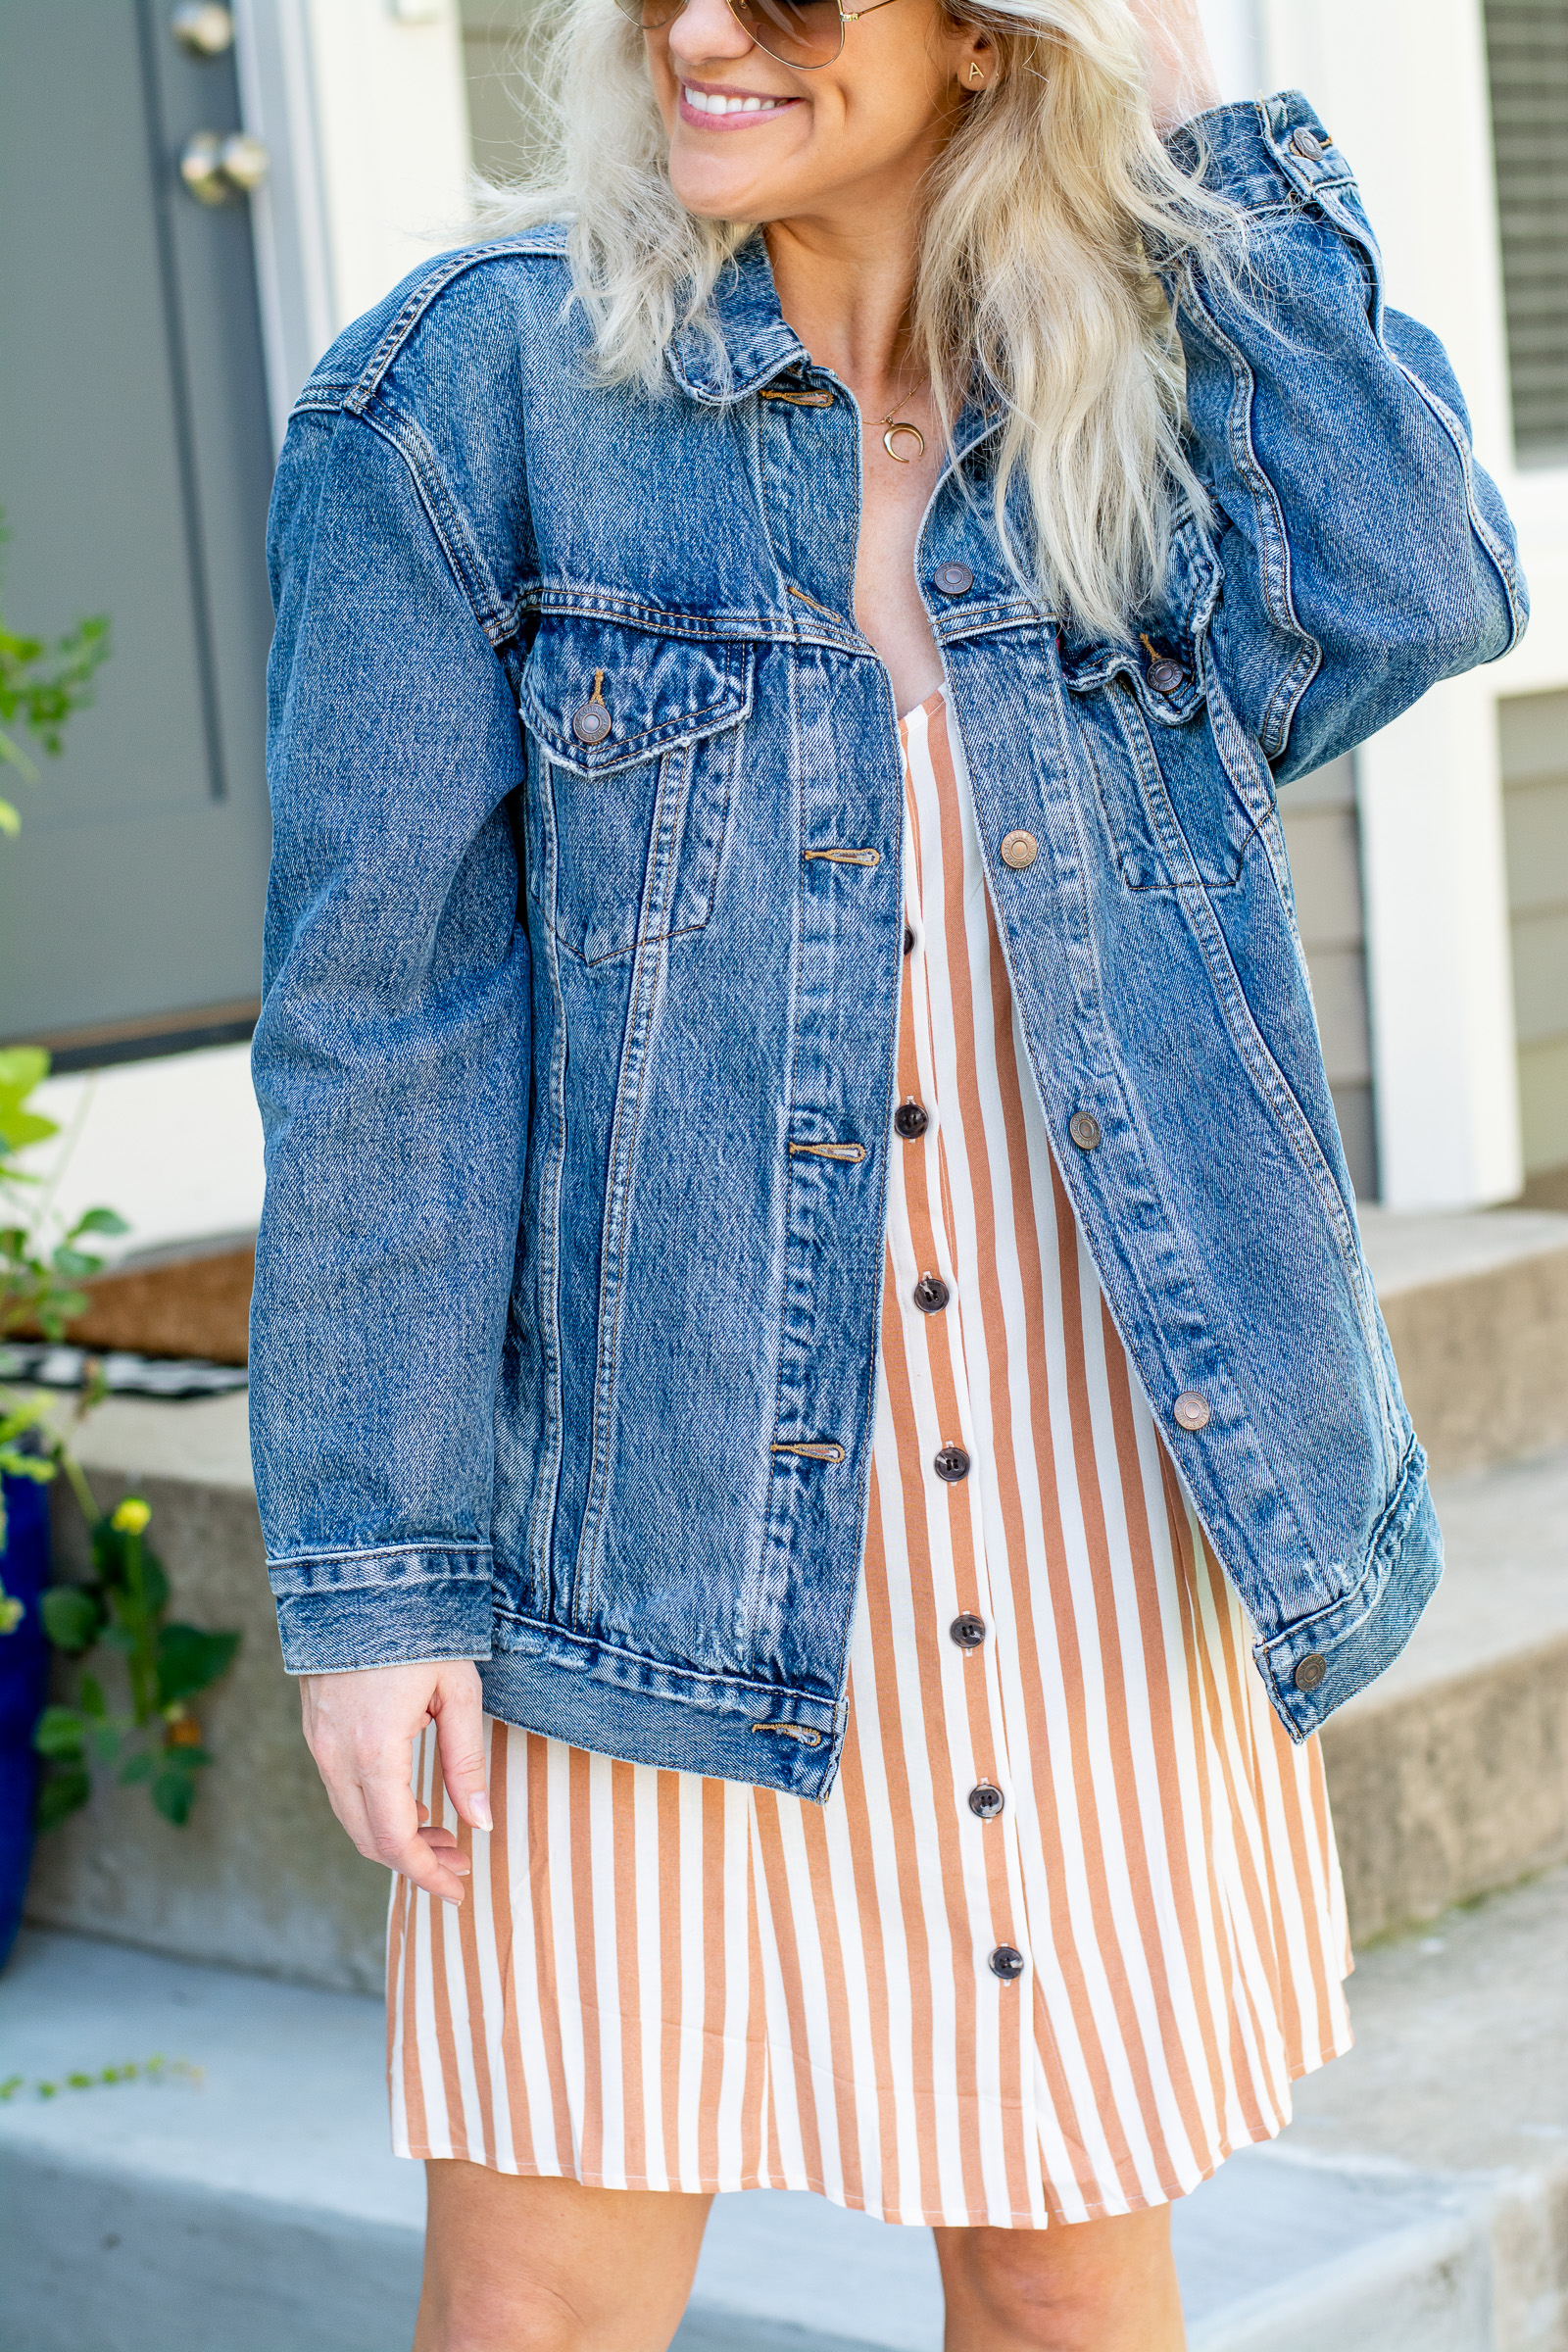 Best Oversized Jean Jacket Makes a Summer Dress Work for Fall.